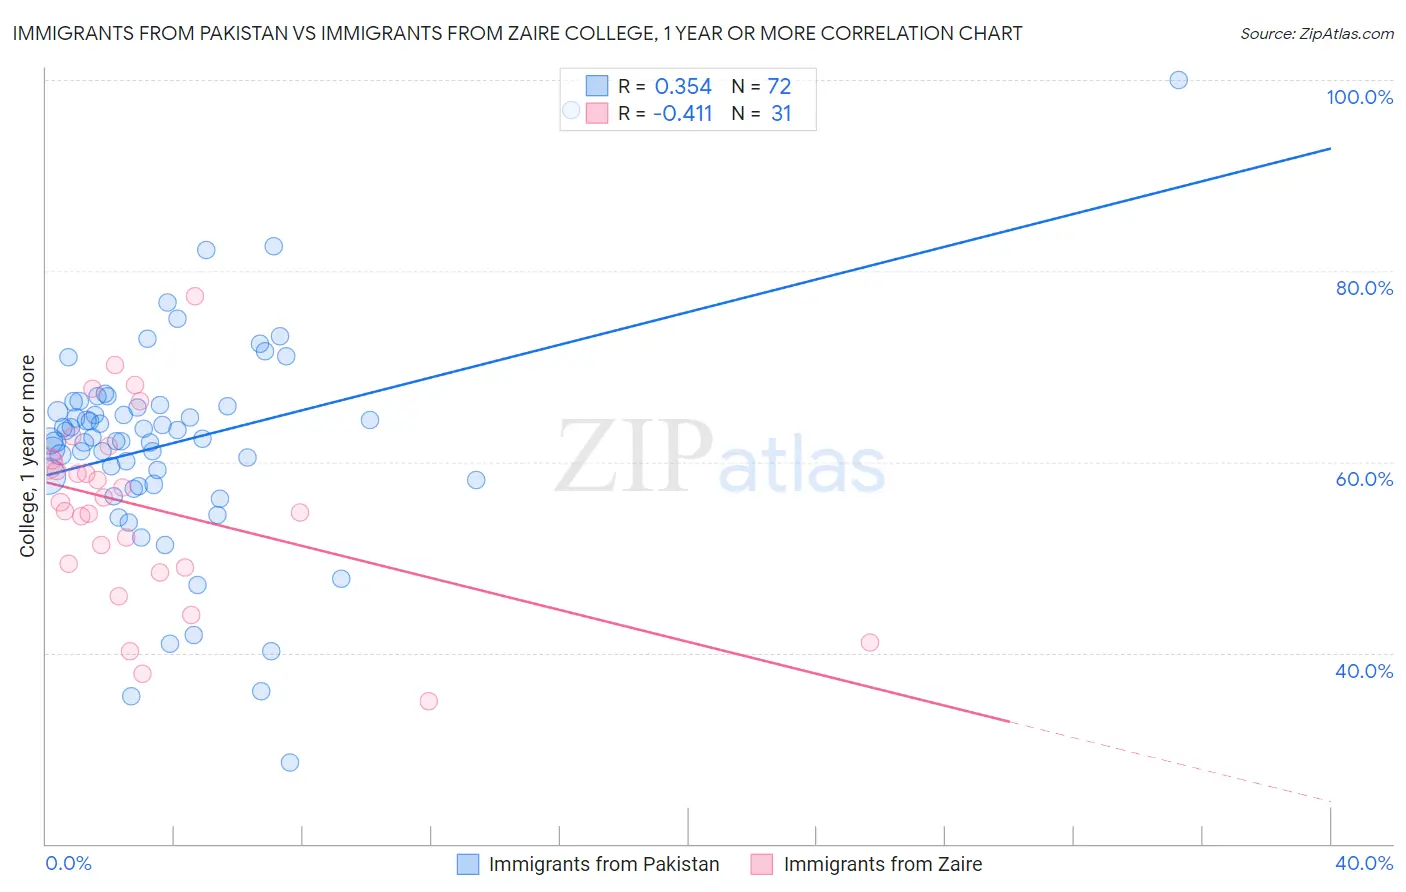 Immigrants from Pakistan vs Immigrants from Zaire College, 1 year or more